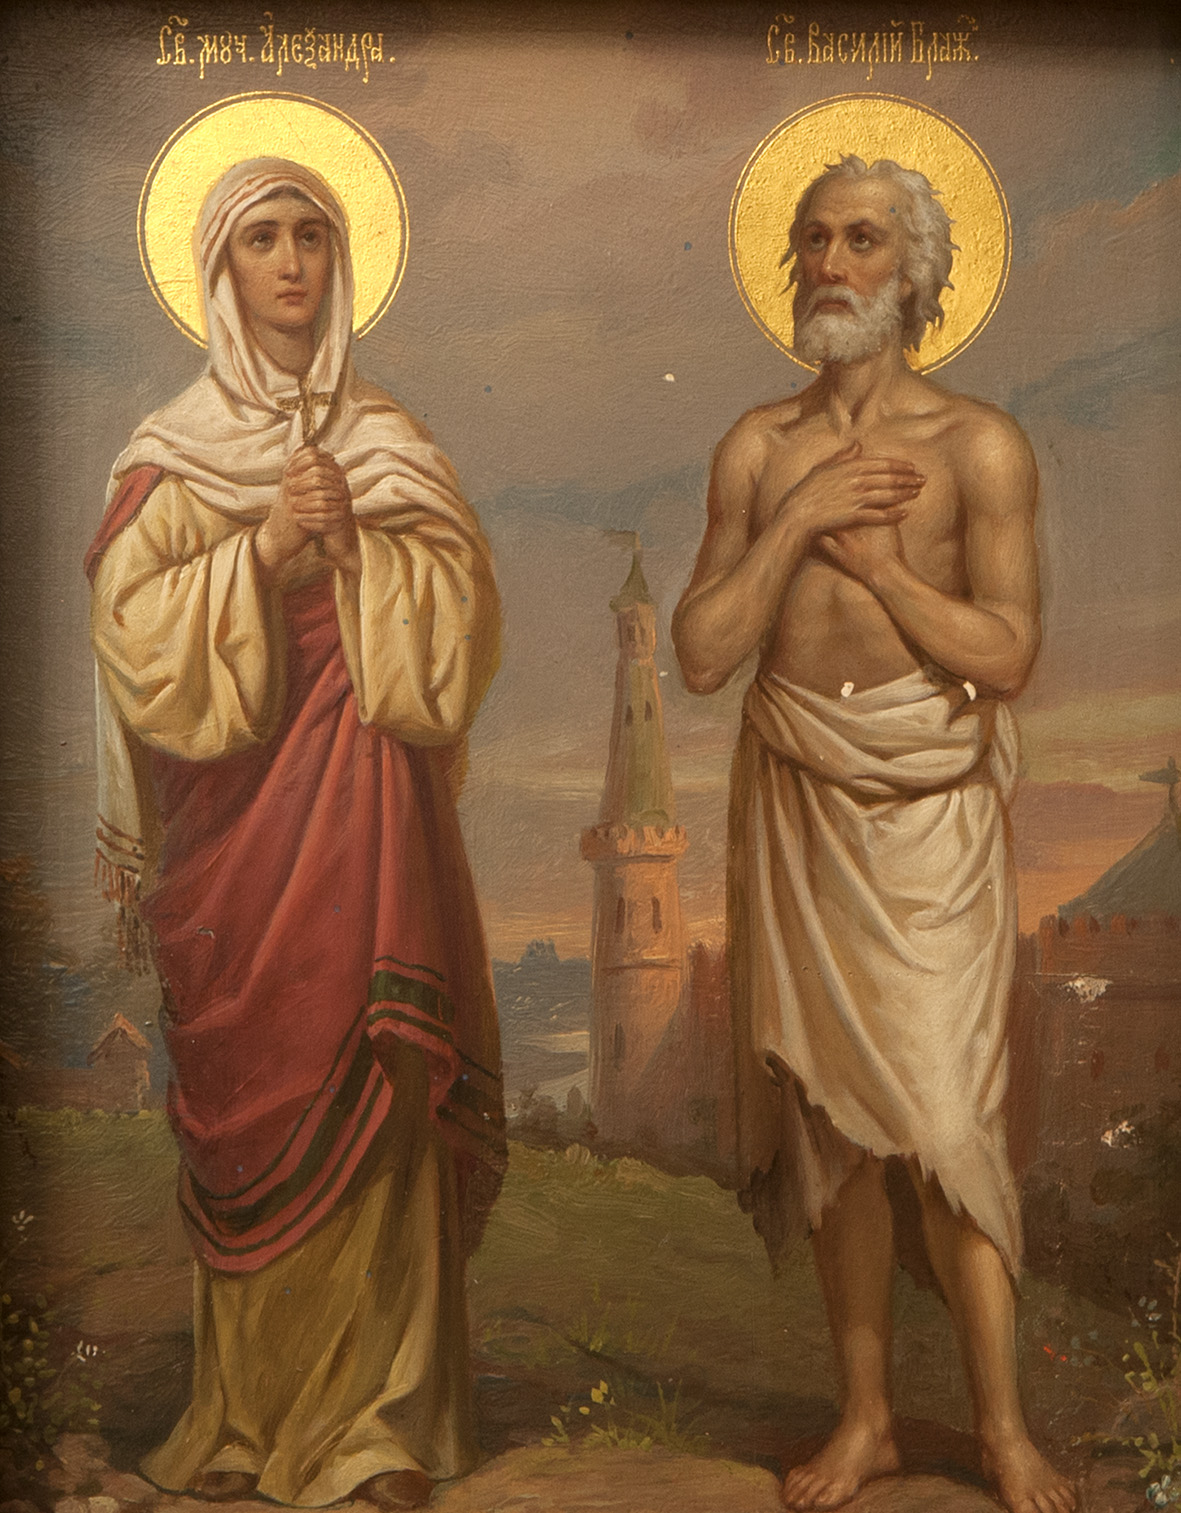 Images of holy martyr Alexandra and Basil the Blessed.